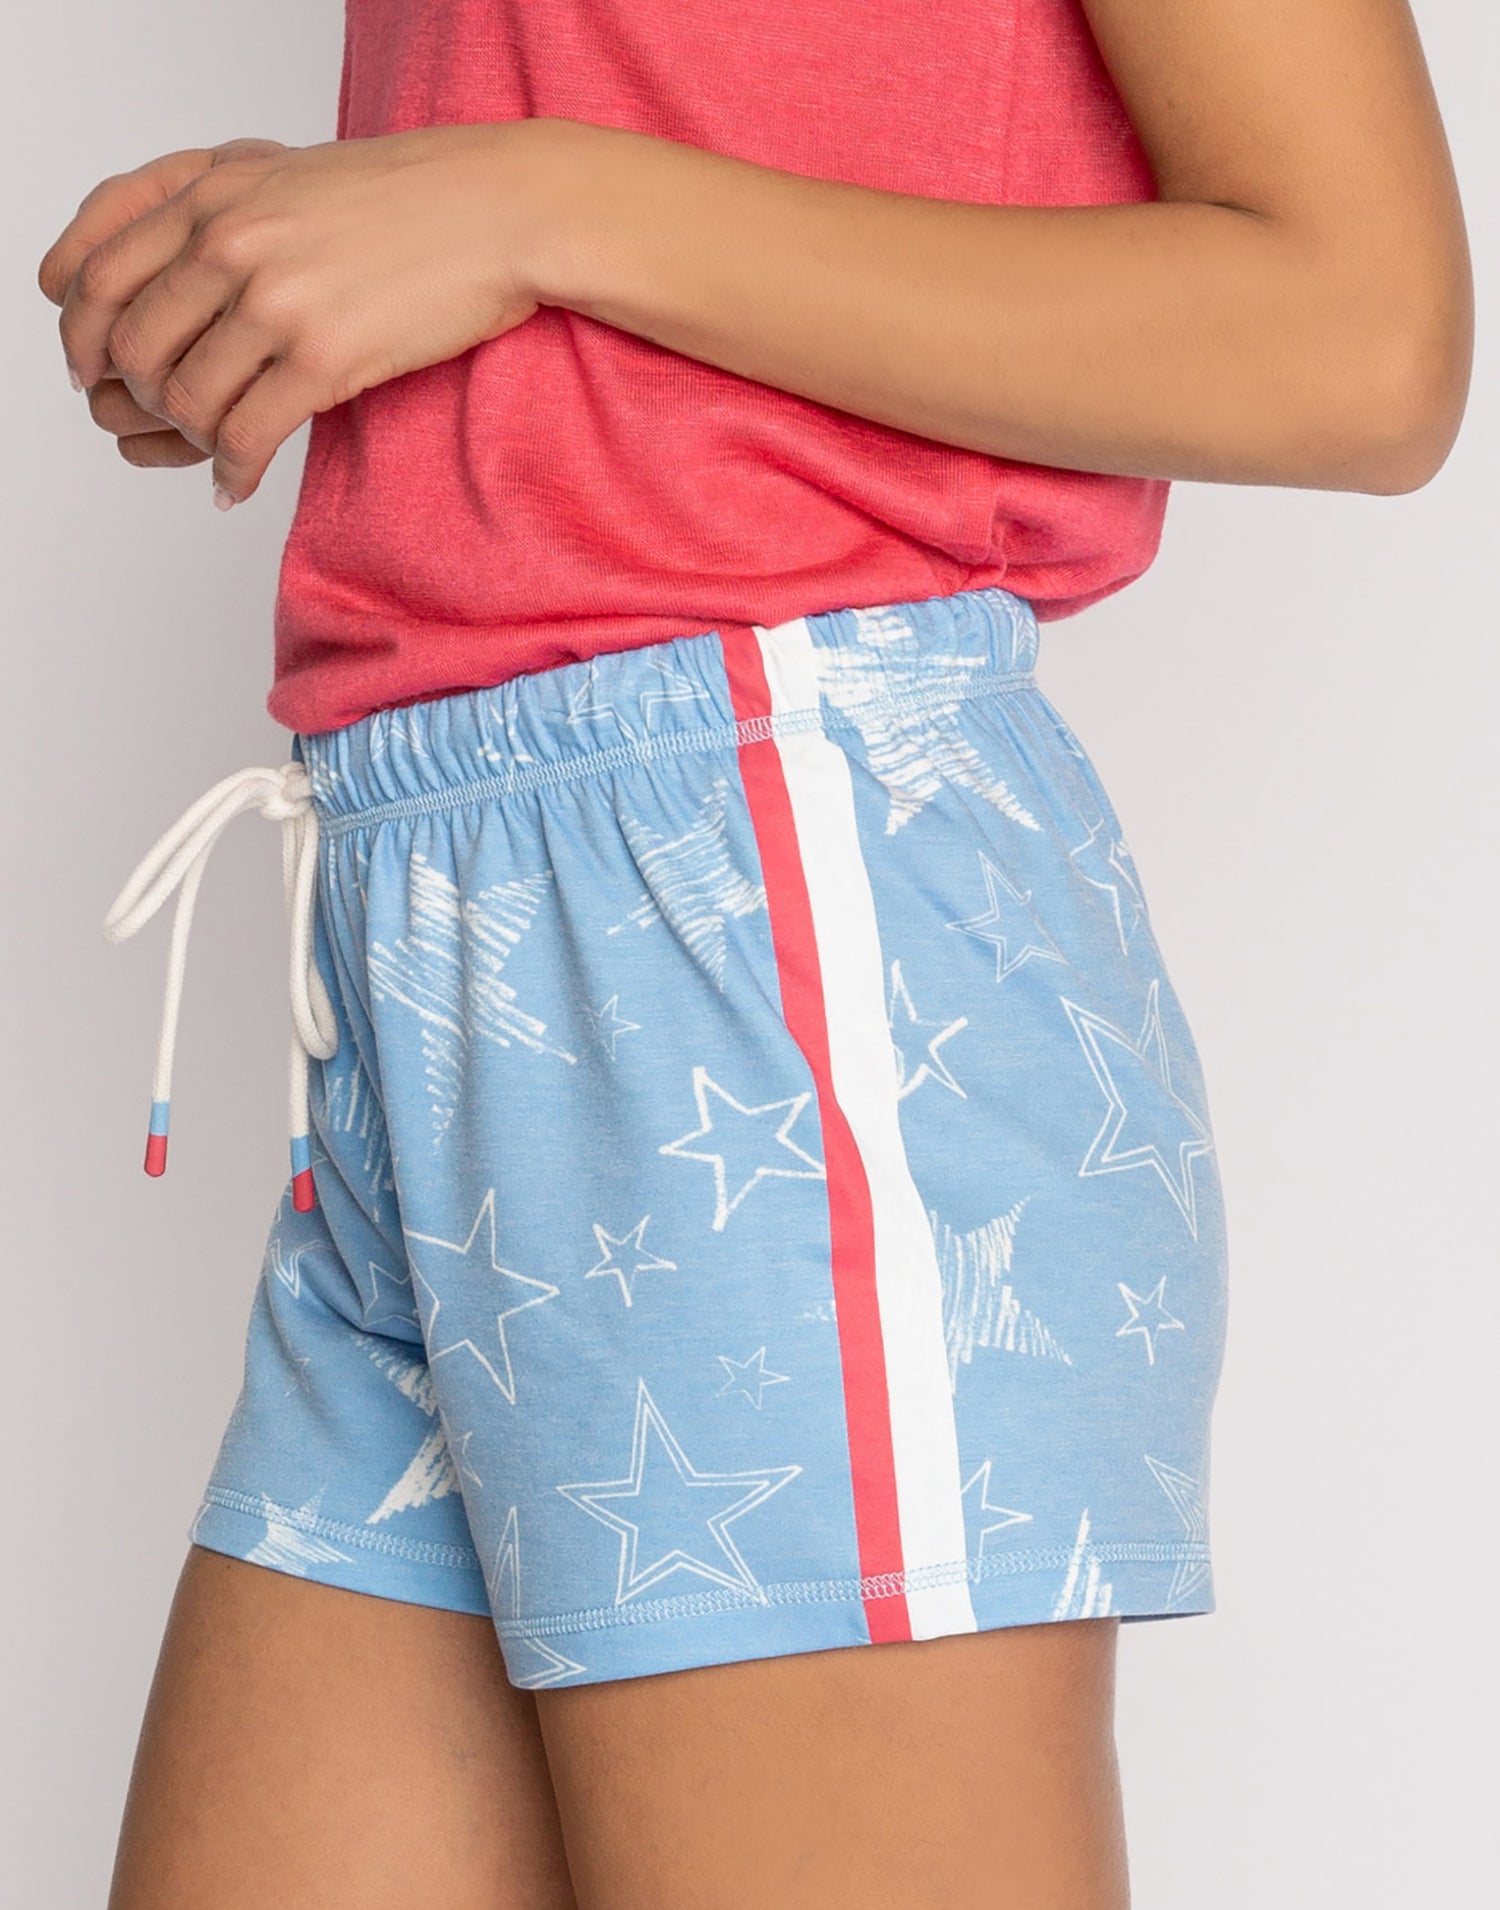 Star Spangled Short by P.J. Salvage in Tranquil Blue - Angled Detail View